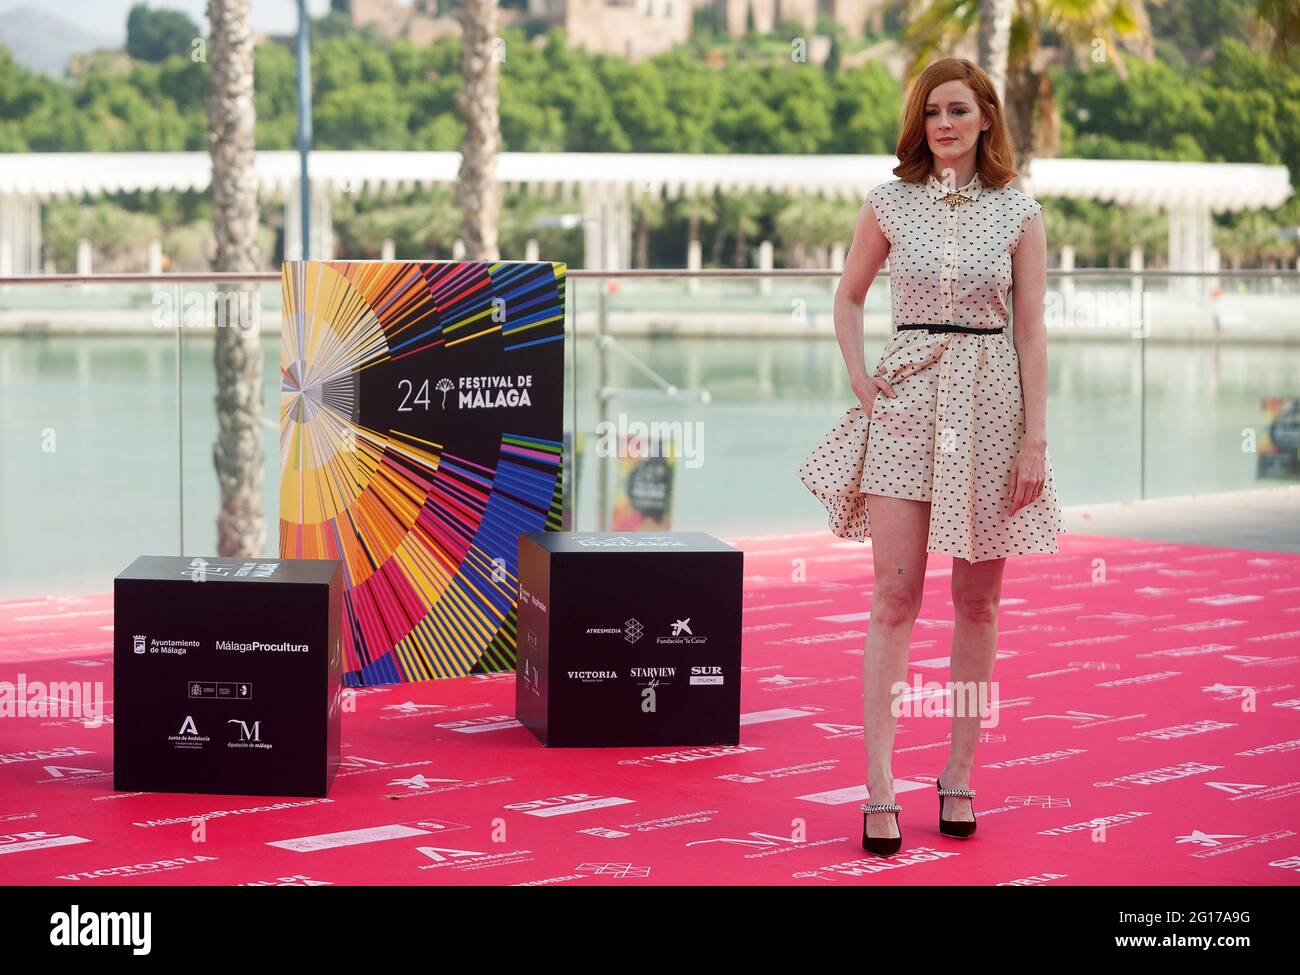 Malaga, Spain. 05th June, 2021. Spanish actress Ana Maria Polvorosa attends the photocall of the film 'Con quien viajas'. The new edition of the 24th Malaga Spanish Film Festival, great cinematographic event in Spain, present the films candidates to win the 'Biznaga de Oro' prize, following all measures to prevent the spread of coronavirus and to guarantee a secure event. The festival will be held from 3 to 13 June. (Photo by Jesus Merida/SOPA Images/Sipa USA) Credit: Sipa USA/Alamy Live News Stock Photo